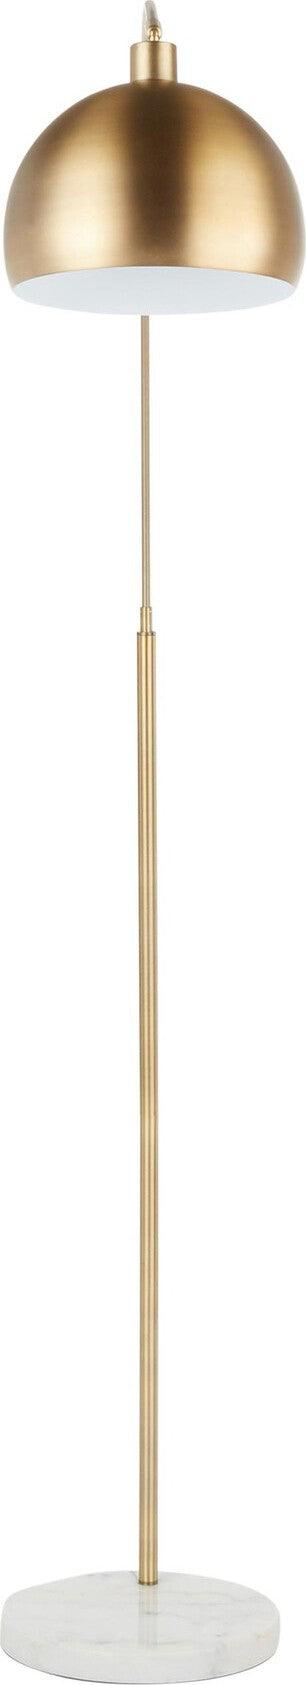 Lumisource Floor Lamps - March Floor Lamp White Marble & Antique Brass